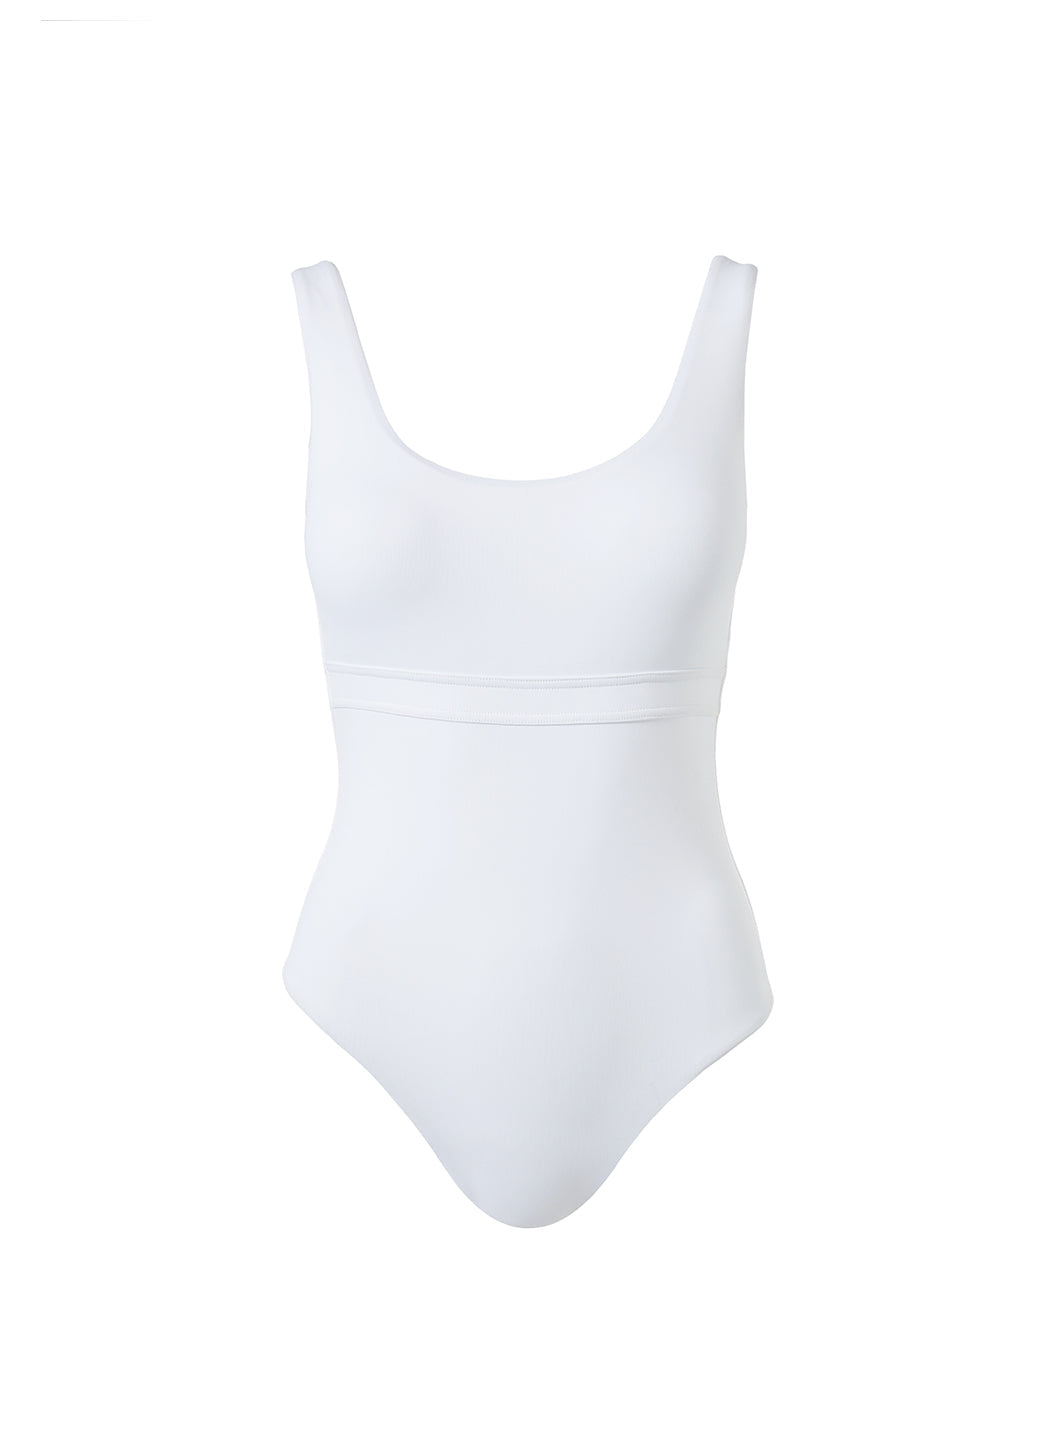 Sunflair Opera Pretty Plunge One Piece Swimsuit – White (Style: 62605)